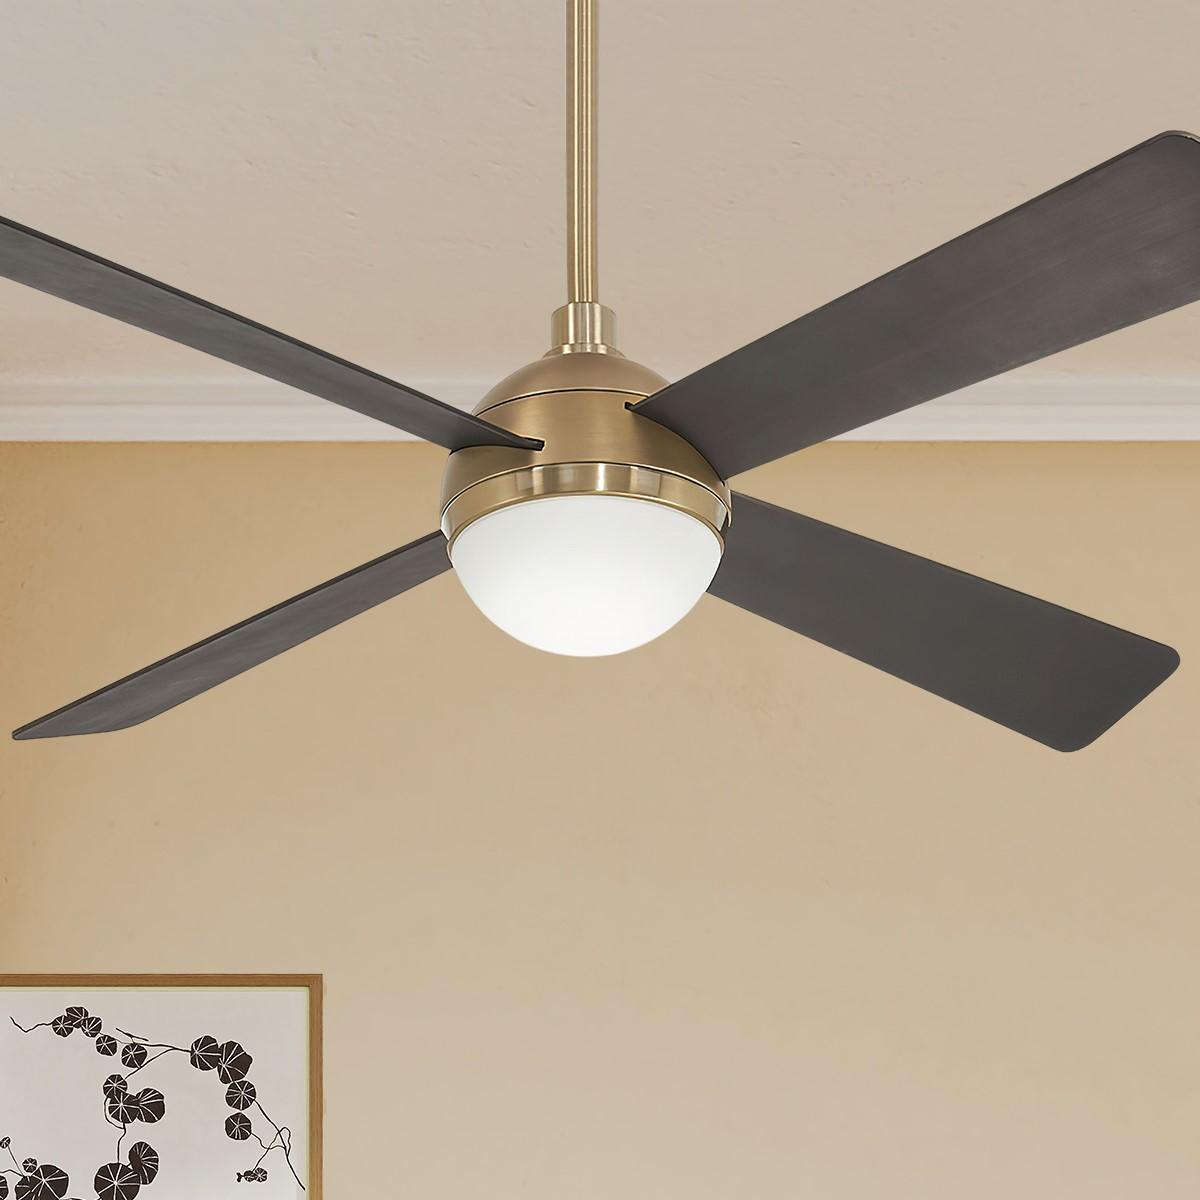 Orb 54 Inch Modern Ceiling Fan With Light And Remote - Bees Lighting